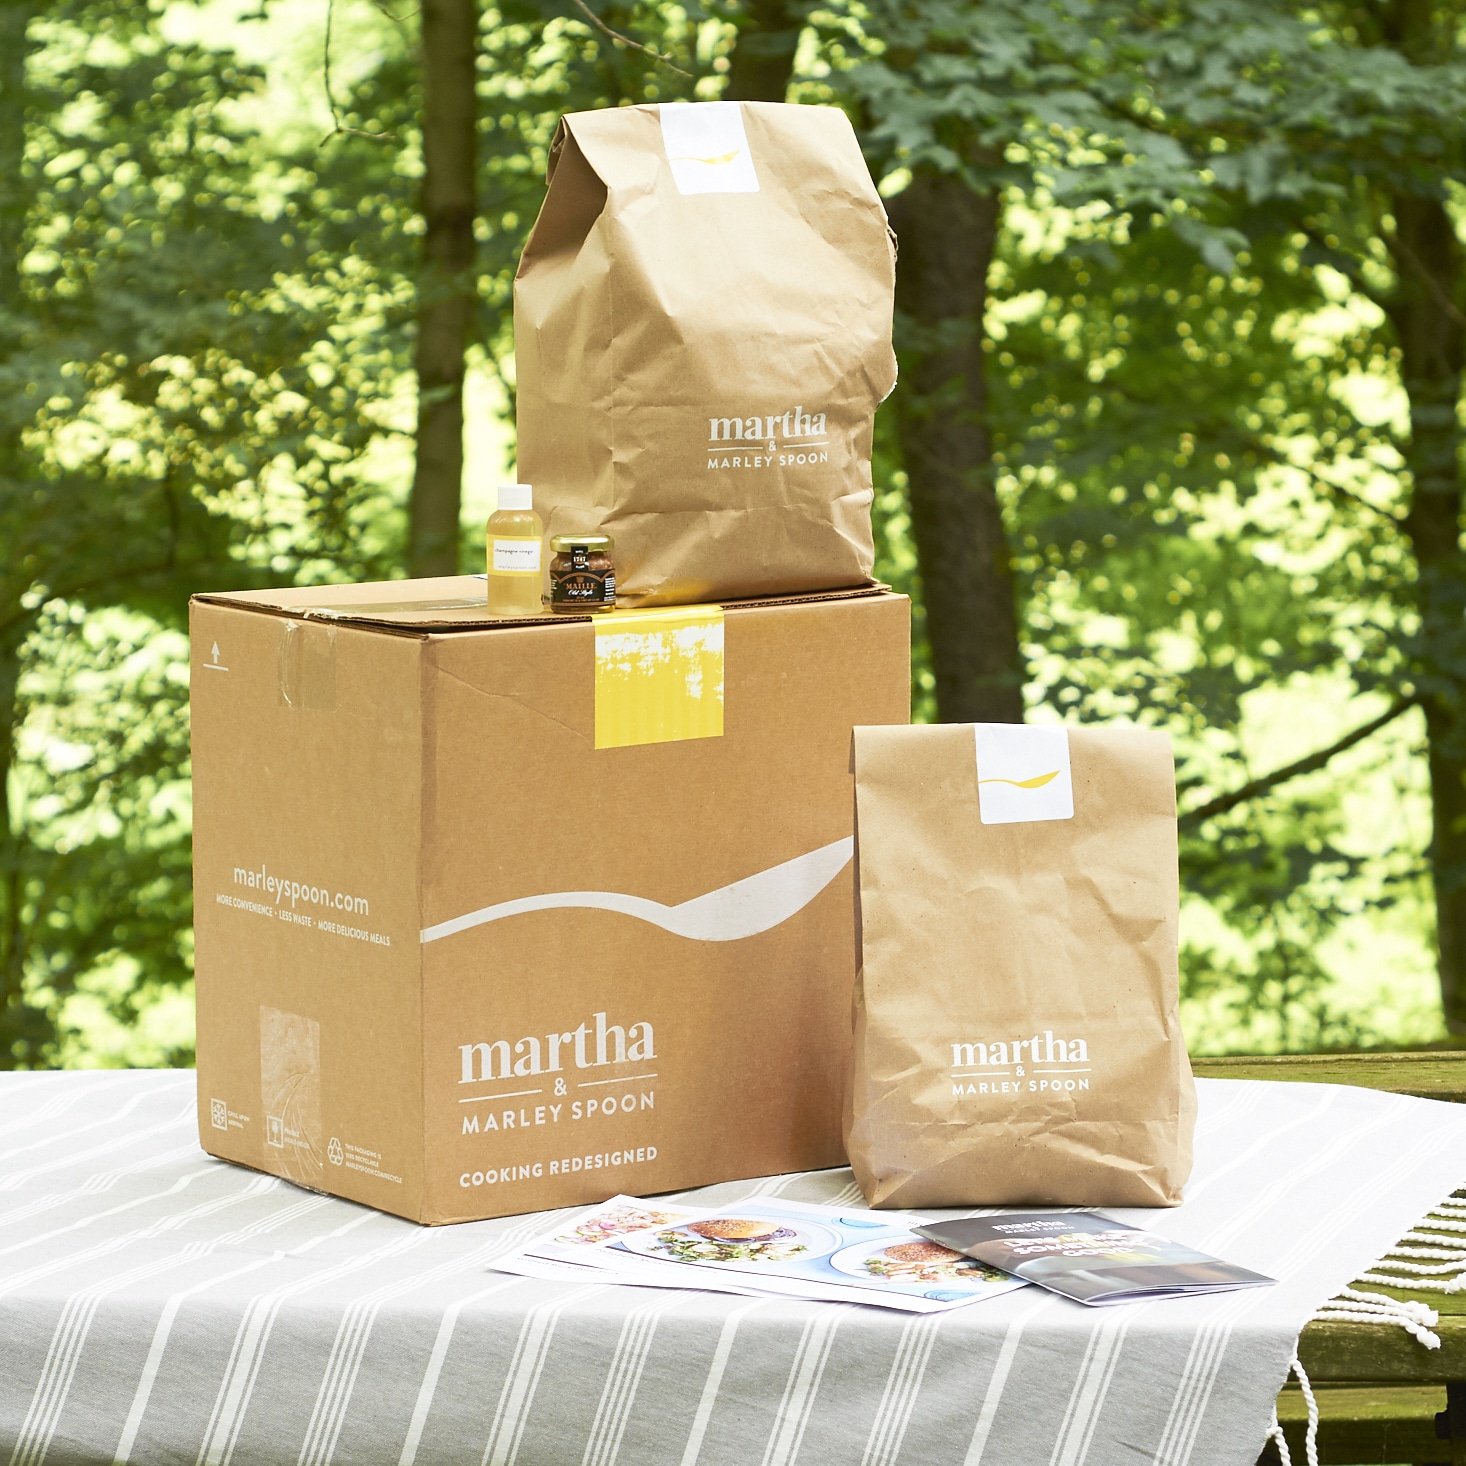 Martha Stewart & Marley Spoon Grilling Recipes Review June 2017 - Fully unboxed Marley Spoon box on picnic table.